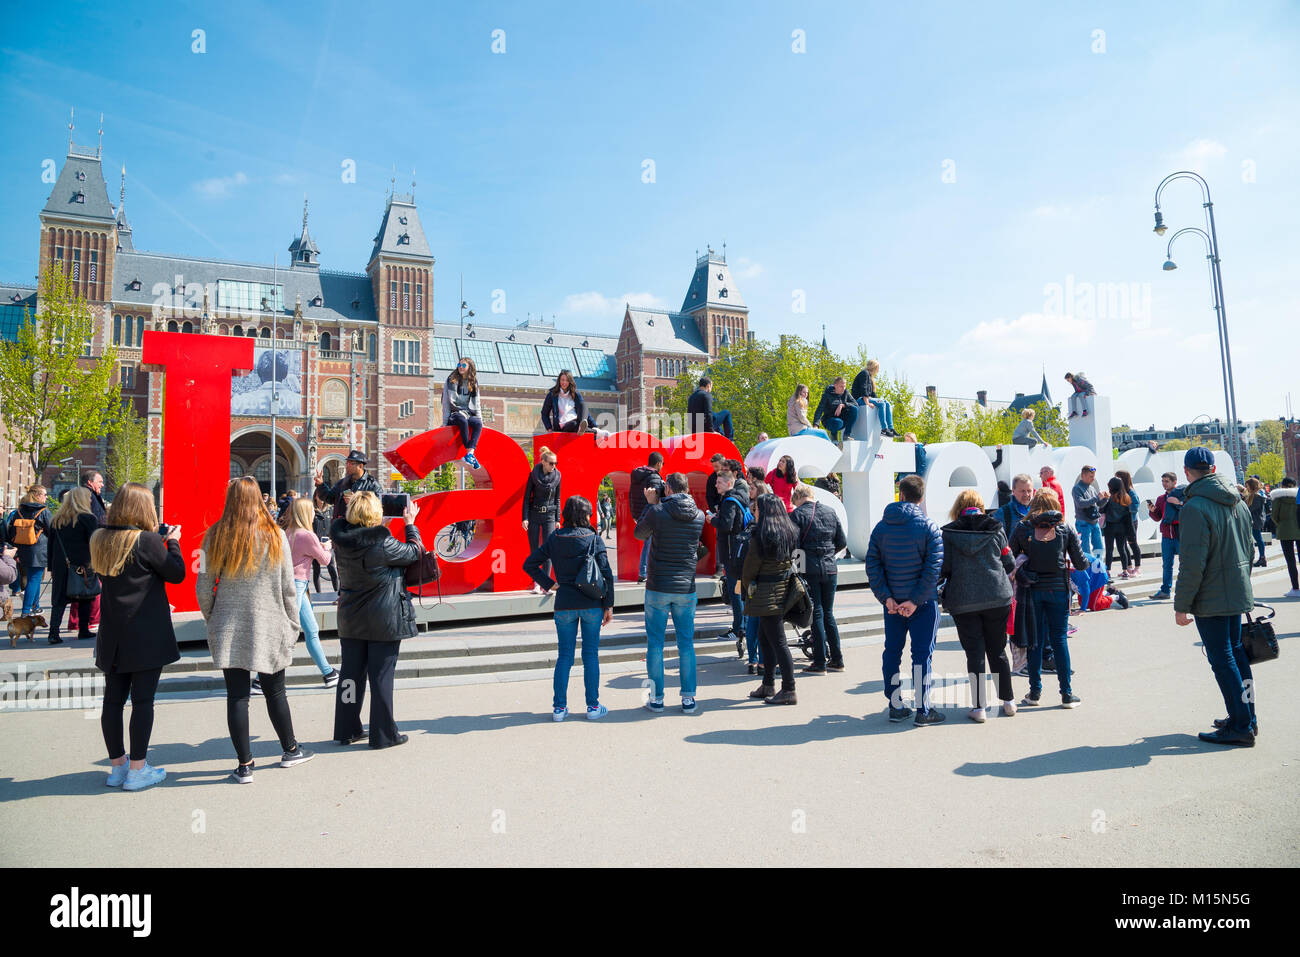 Amsterdam, Netherlands - April 20, 2017: The I Amsterdam sign in front of the Rijksmuseum is an attraction for tourists wanting to take pictures Stock Photo